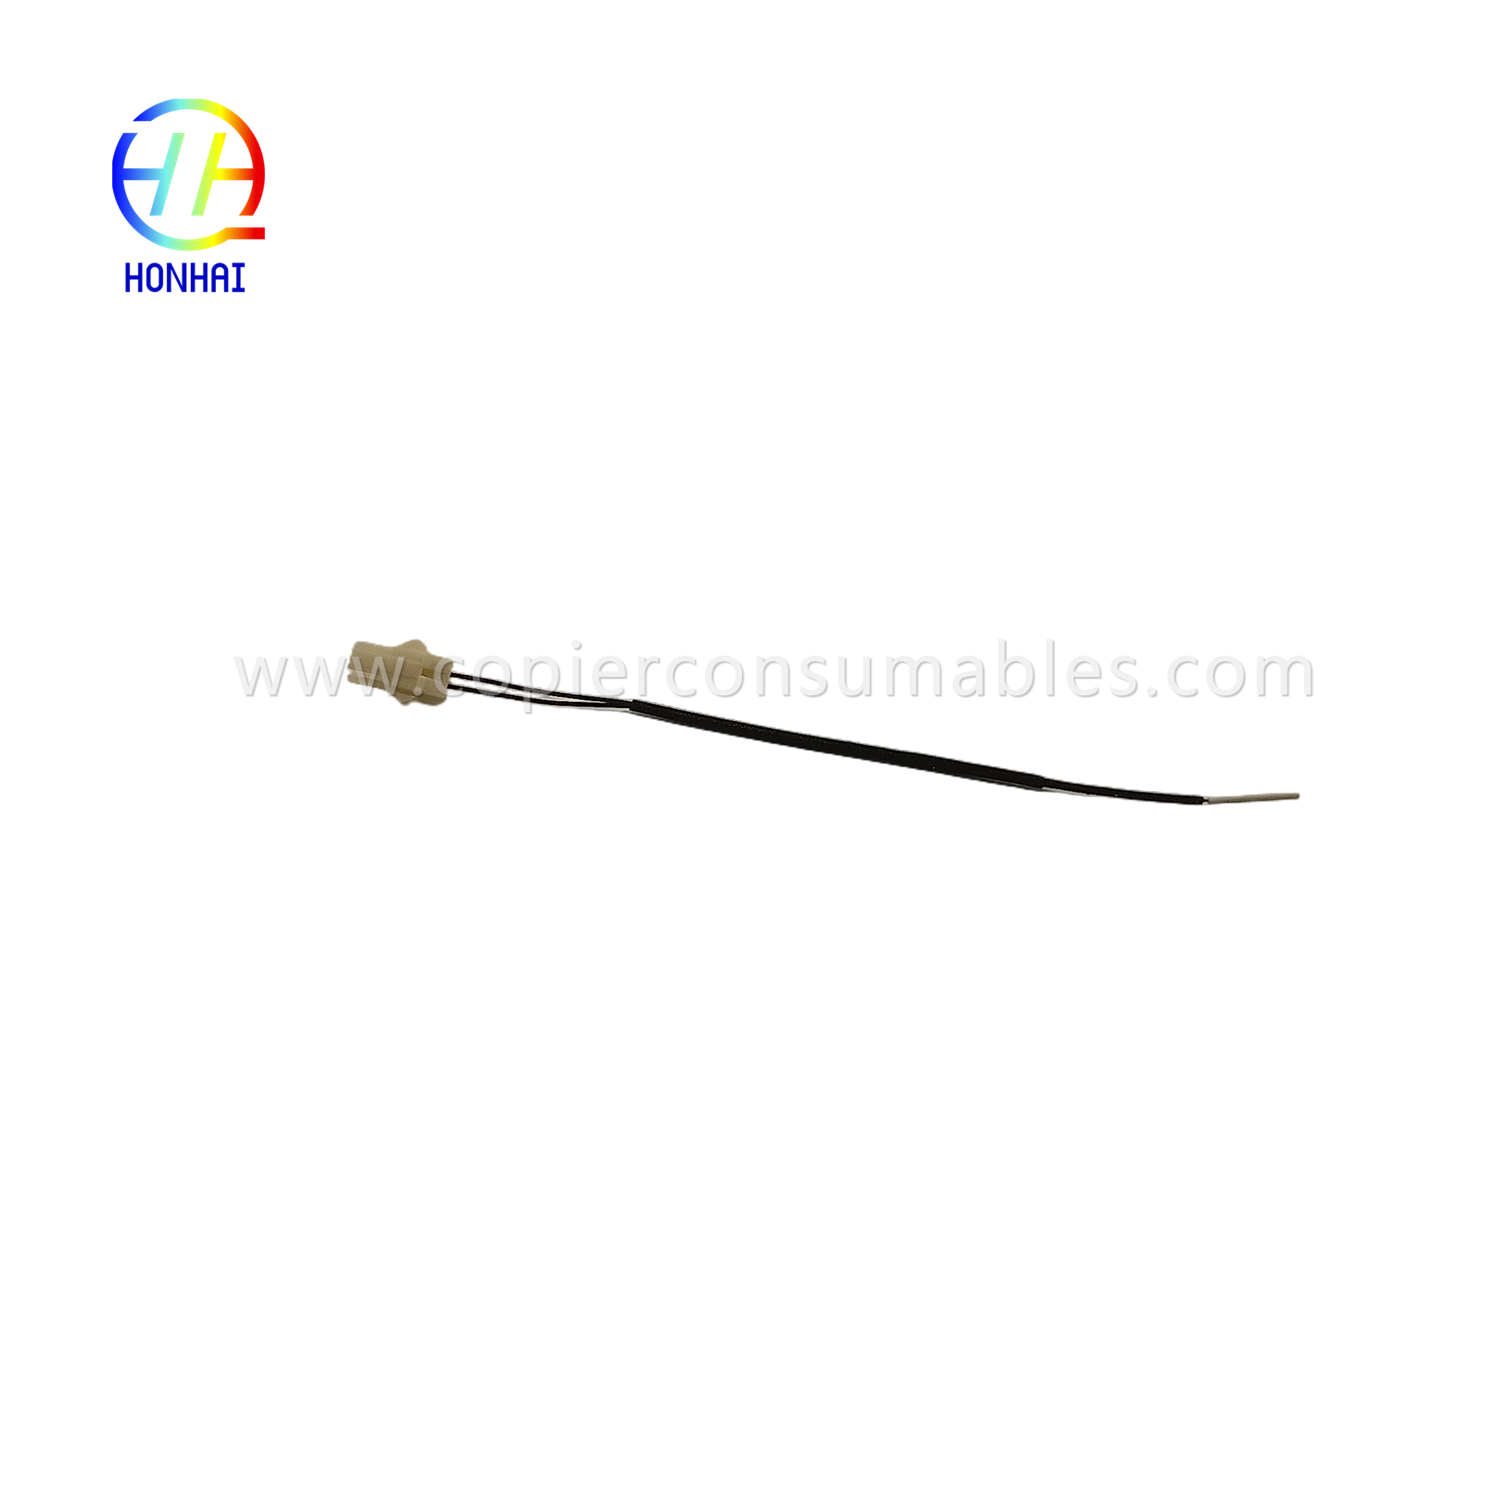 Fuser Thermistor mo OCE 9400 TDS300 TDS750PW300350 (1)